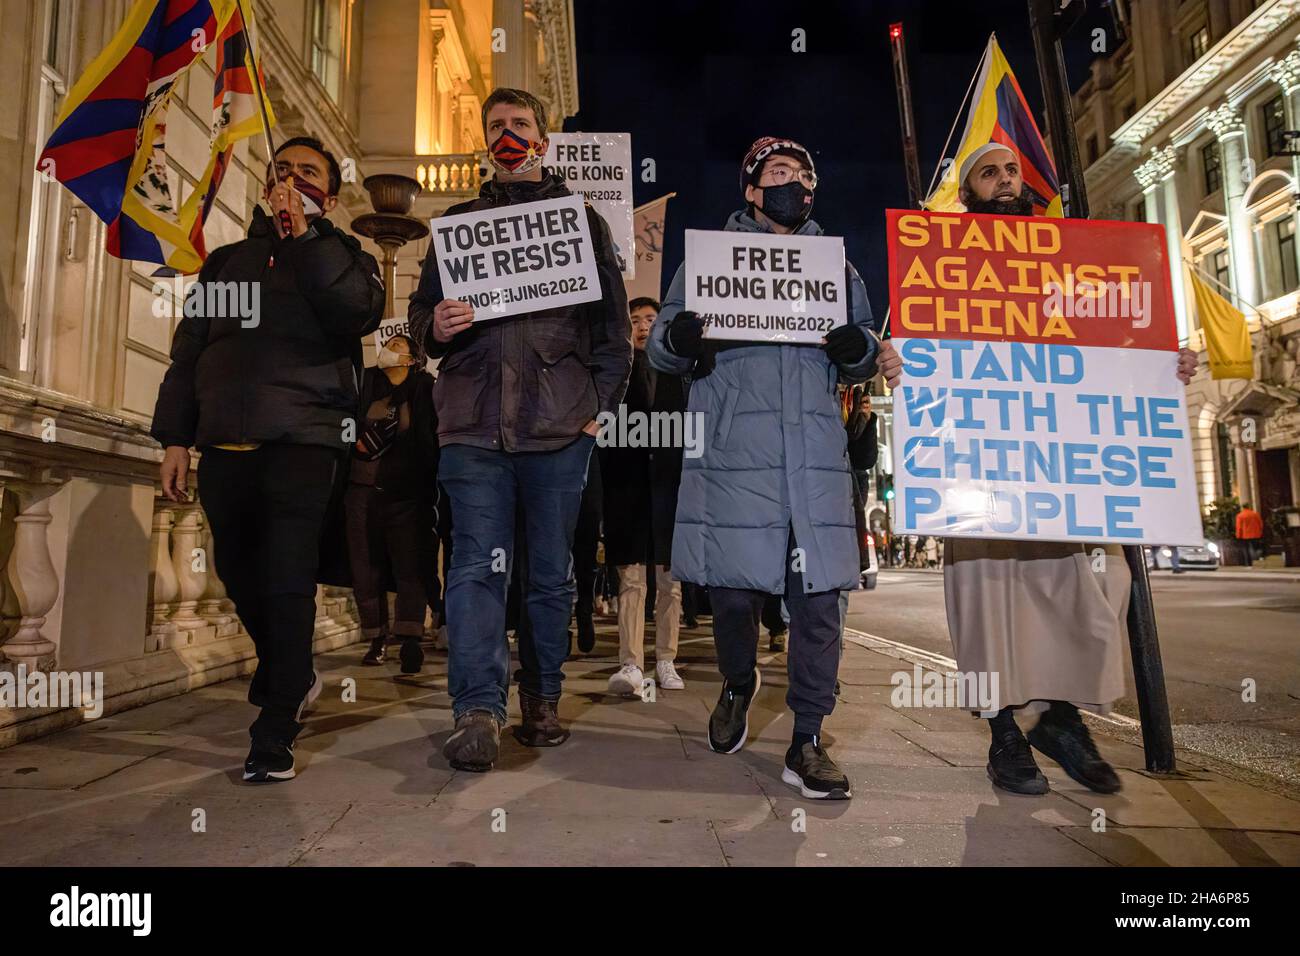 London, UK. 10th Dec, 2021. London, UK. 10th Dec, 2021. Protesters, including exile Hongkonger Simon Cheng, lead others in a protest march while holding placards during the rally. Various anti-Chinese Communist Party (anti-CCP) communities in London rallied at Piccadilly Circus, later marched to 10 Downing Street. Hong Kongers, Tibetans and Uighurs came together to condemn the attempts from the CCP to oppress dissenting voices. Protesters also demanded the Western world to boycott the 2022 Beijing Winter Olympic games in response to the suppression of human rights in China. Stock Photo